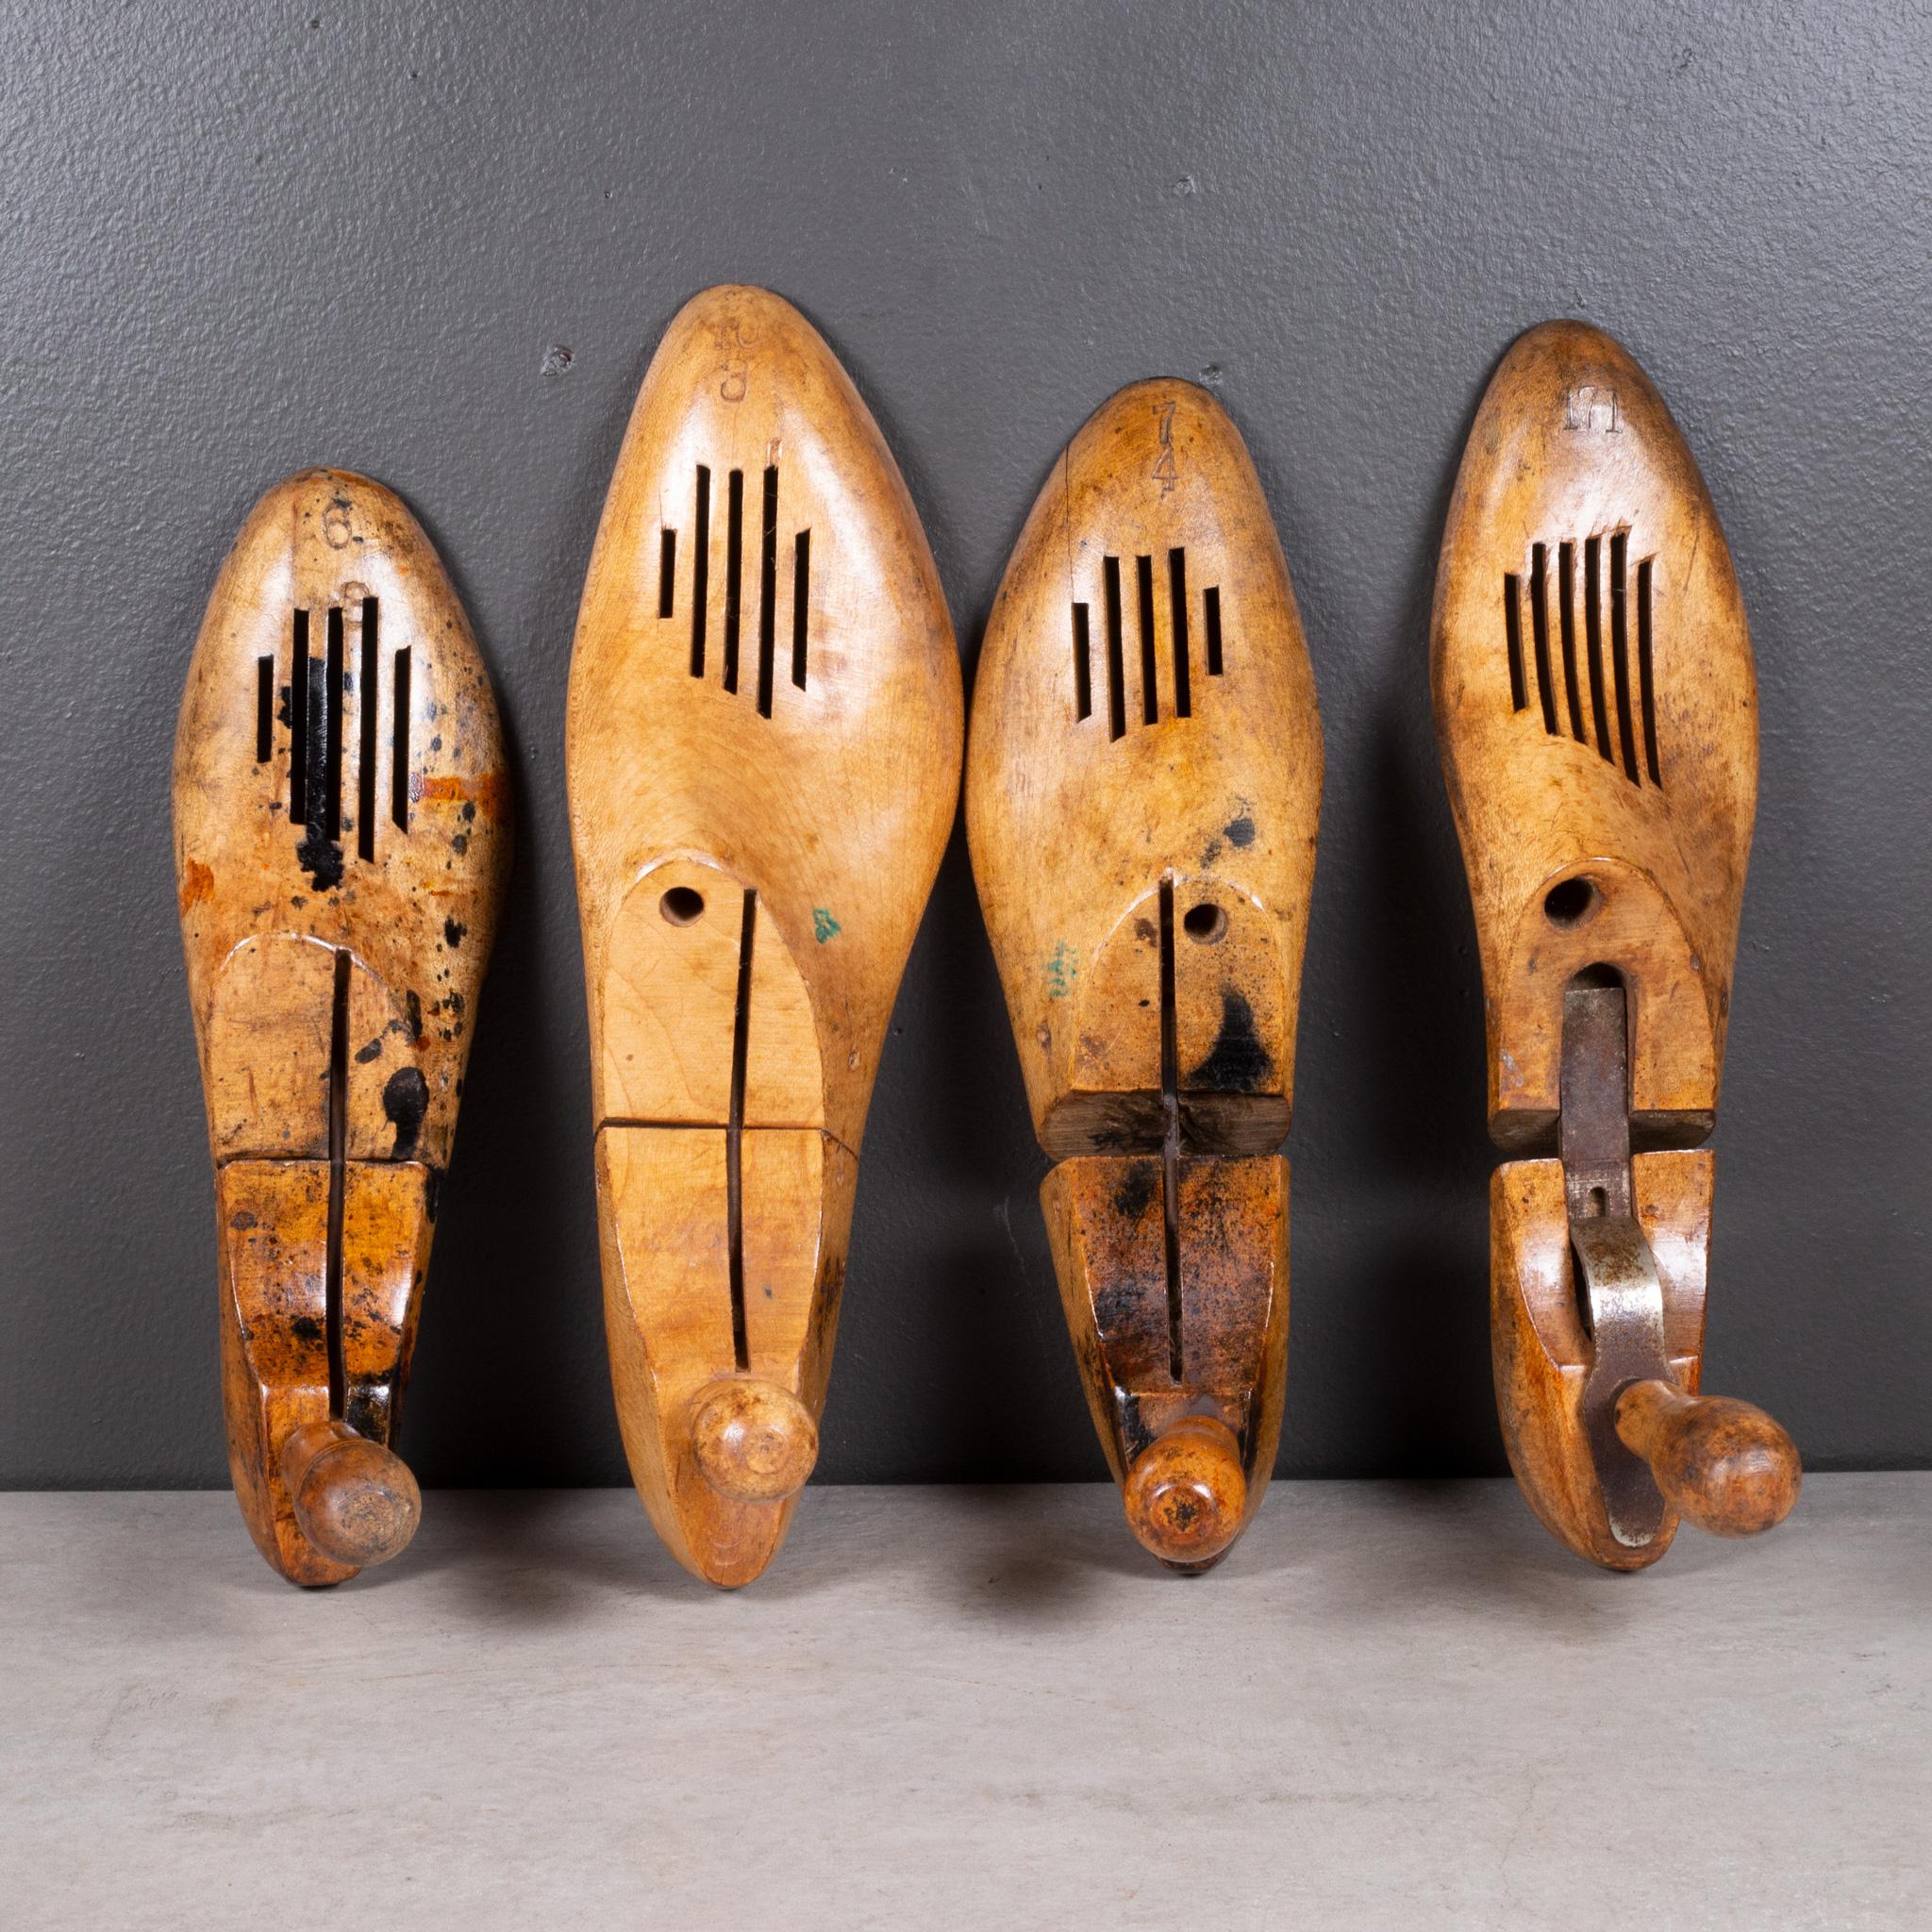 Antique Wooden Shoe Forms c.1920-Multiple Sets Available (FREE SHIPPING) In Good Condition For Sale In San Francisco, CA